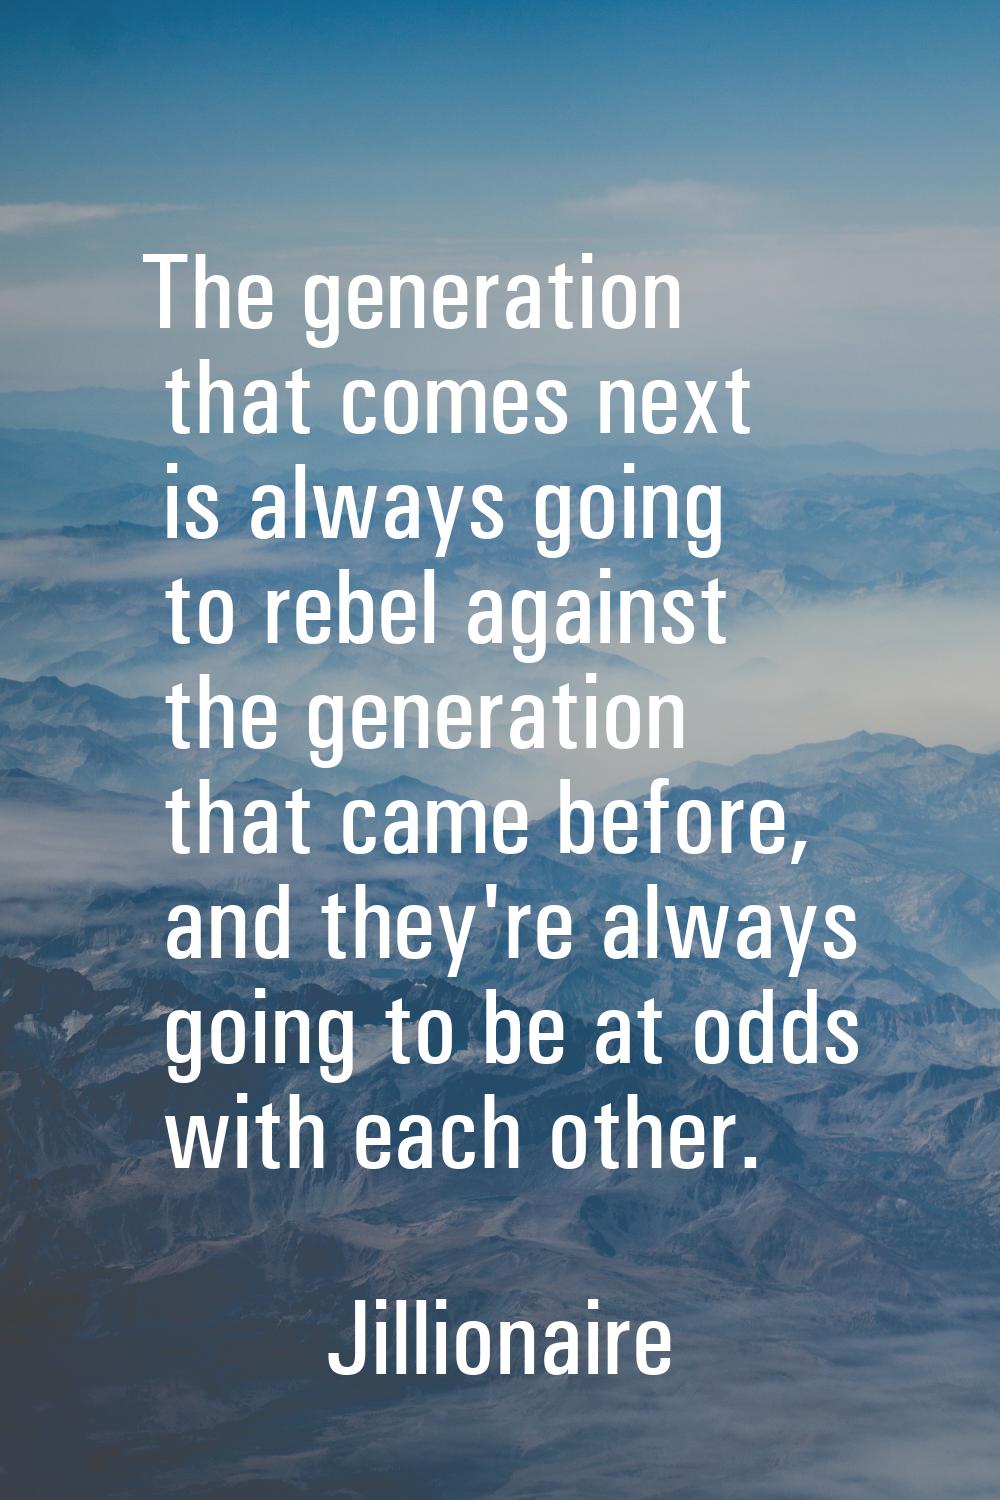 The generation that comes next is always going to rebel against the generation that came before, an